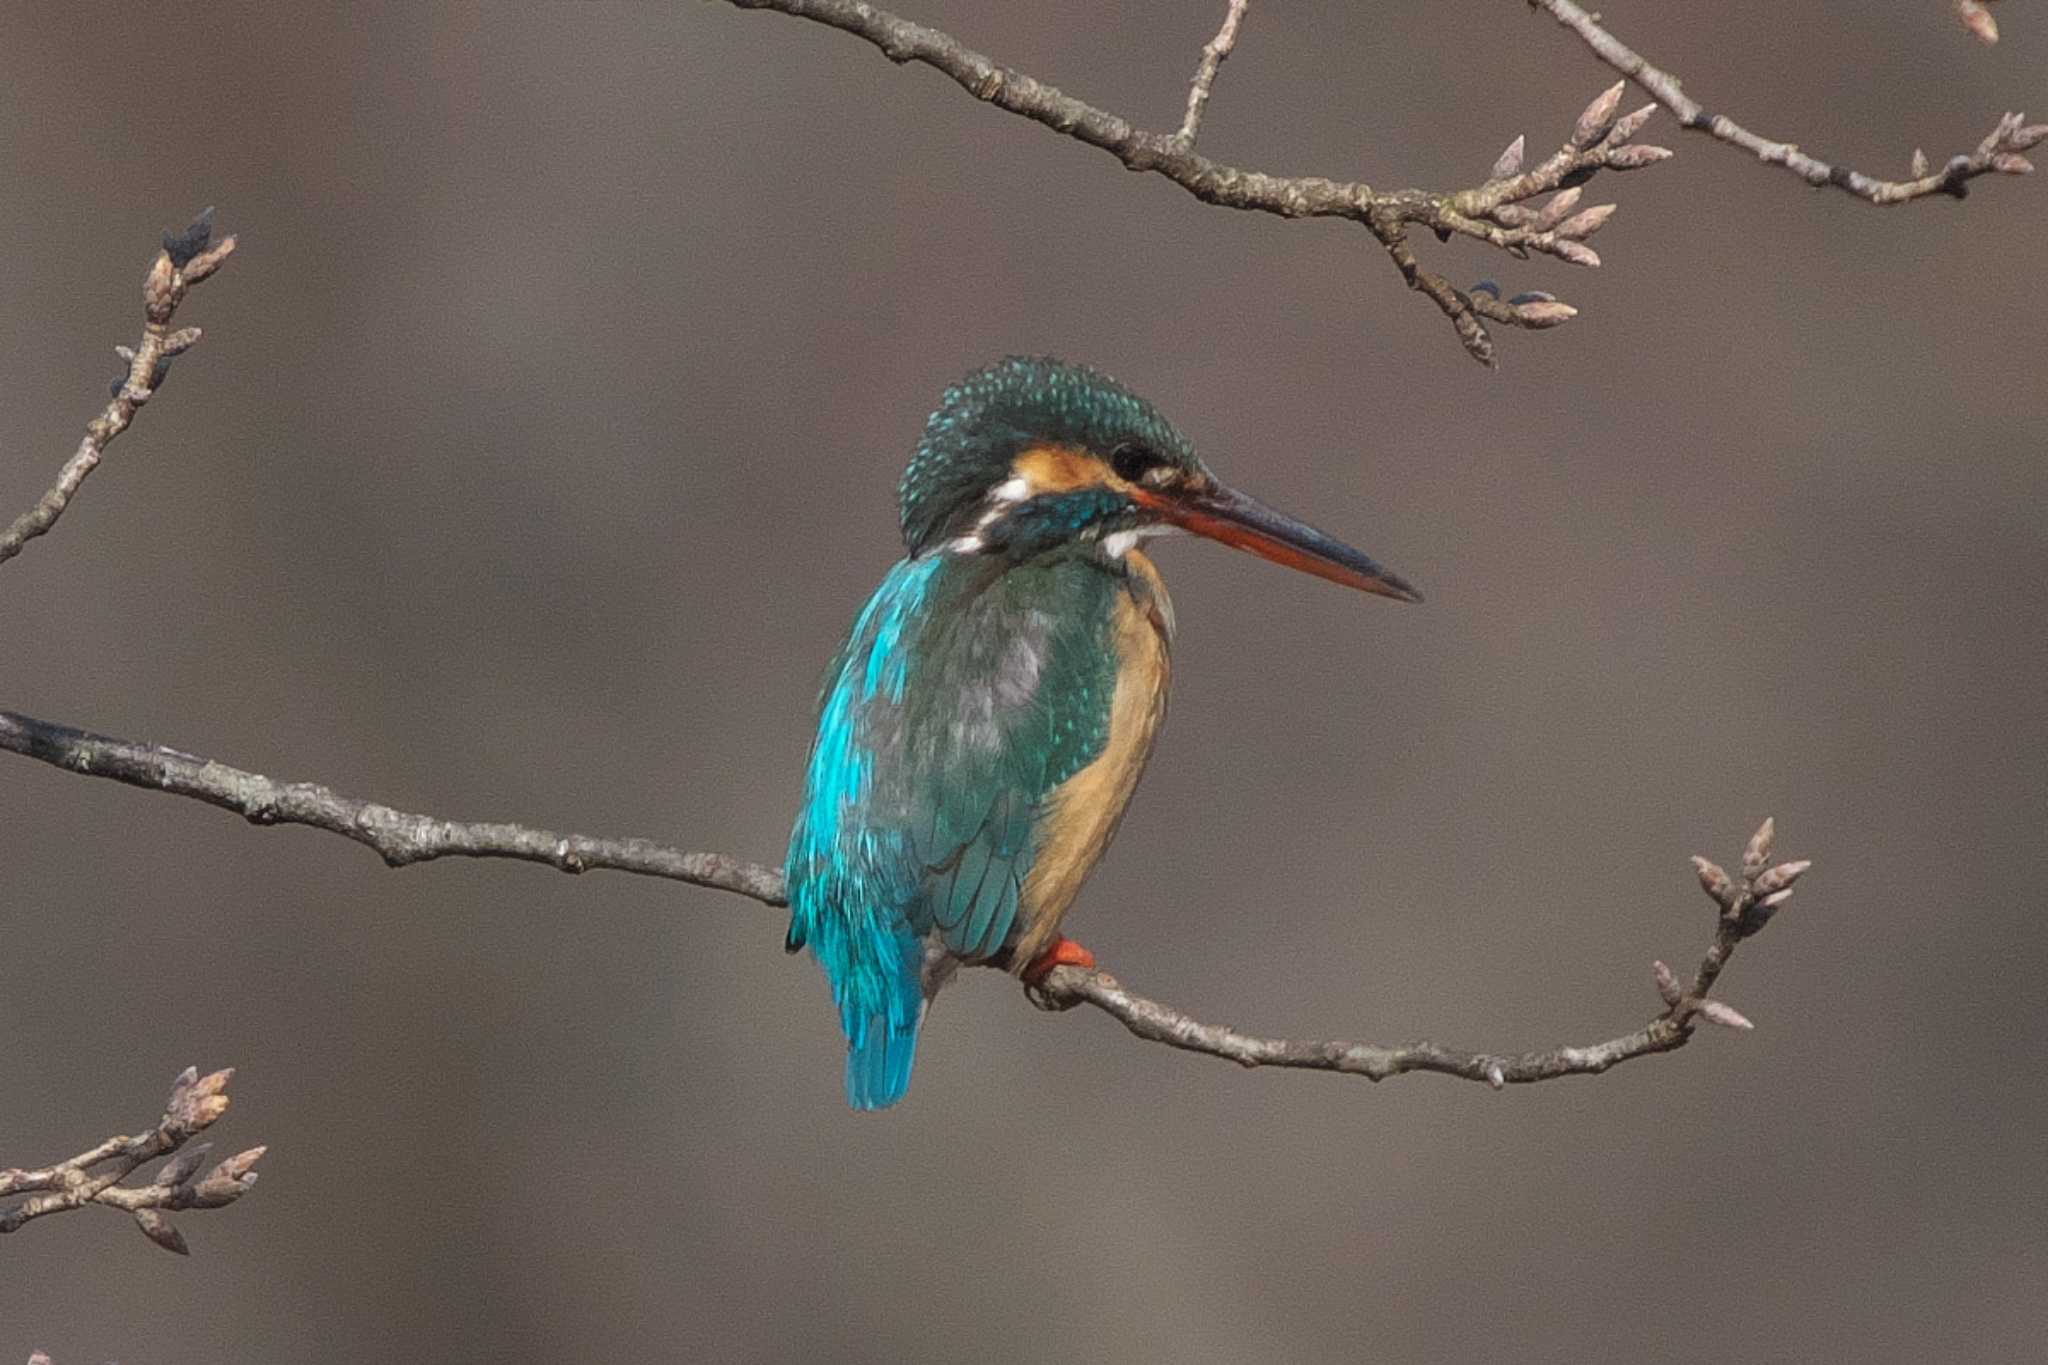 Photo of Common Kingfisher at Kodomo Shizen Park by Y. Watanabe